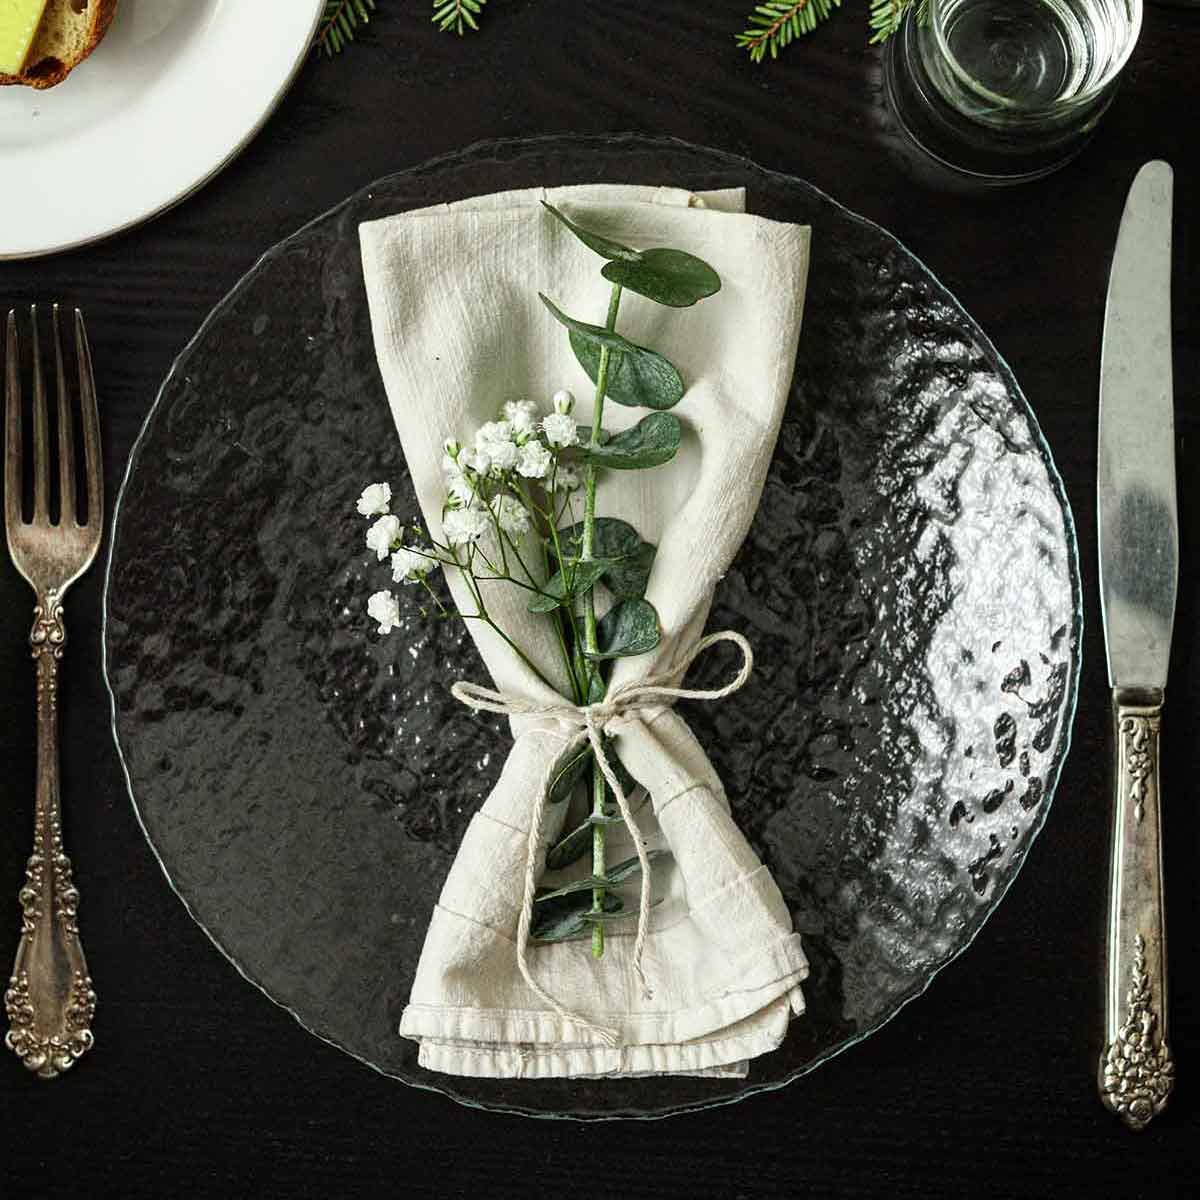 Eucalyptus and Baby’s Breath in a napkin on a table with holiday greenery, a plate of bread, silverware and glassware.